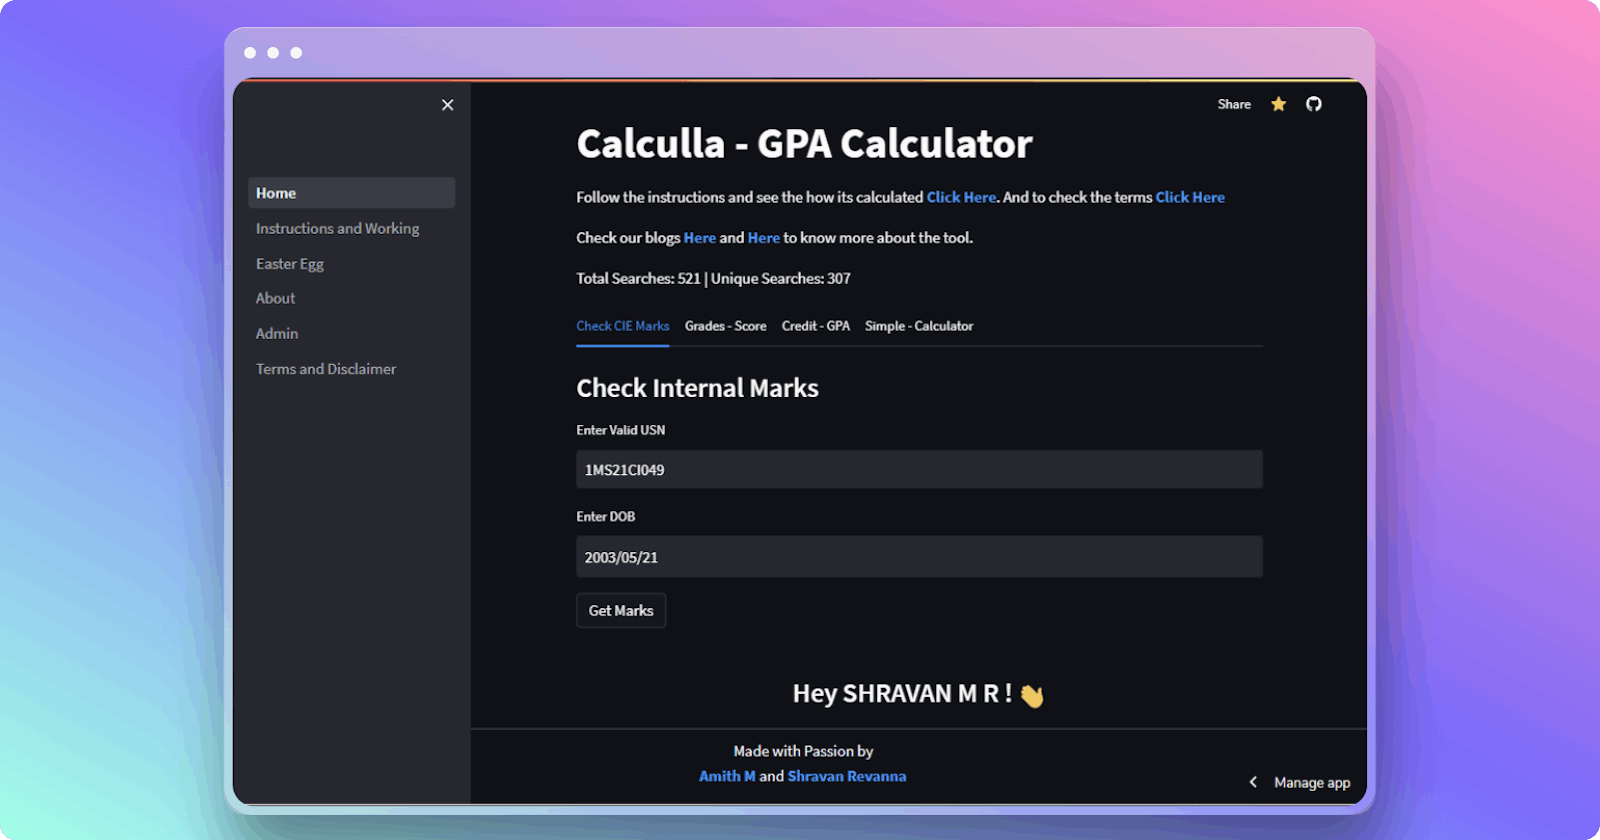 The Next-Level GPA Calculator with Special Powers